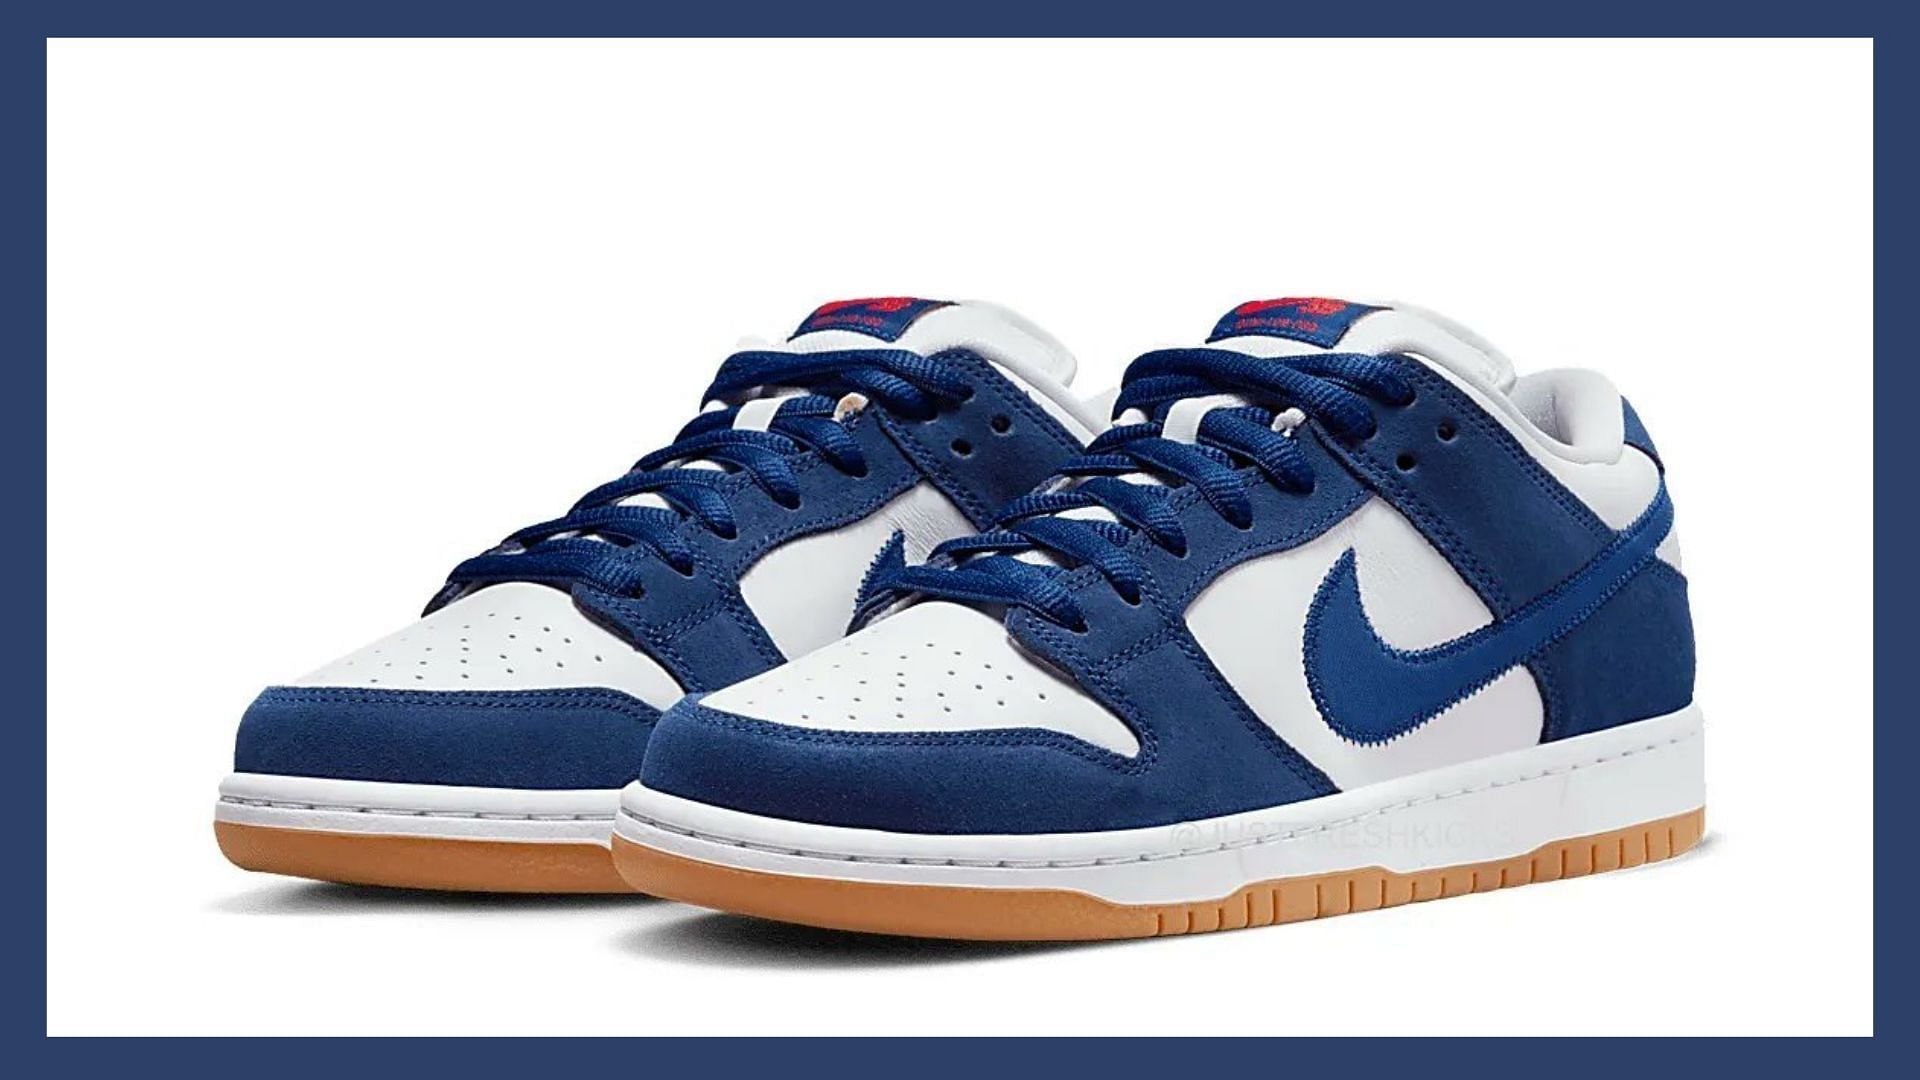 Onveilig Politie verkeer Where to buy Nike SB Dunk Low Dodgers shoes? Price and more details explored